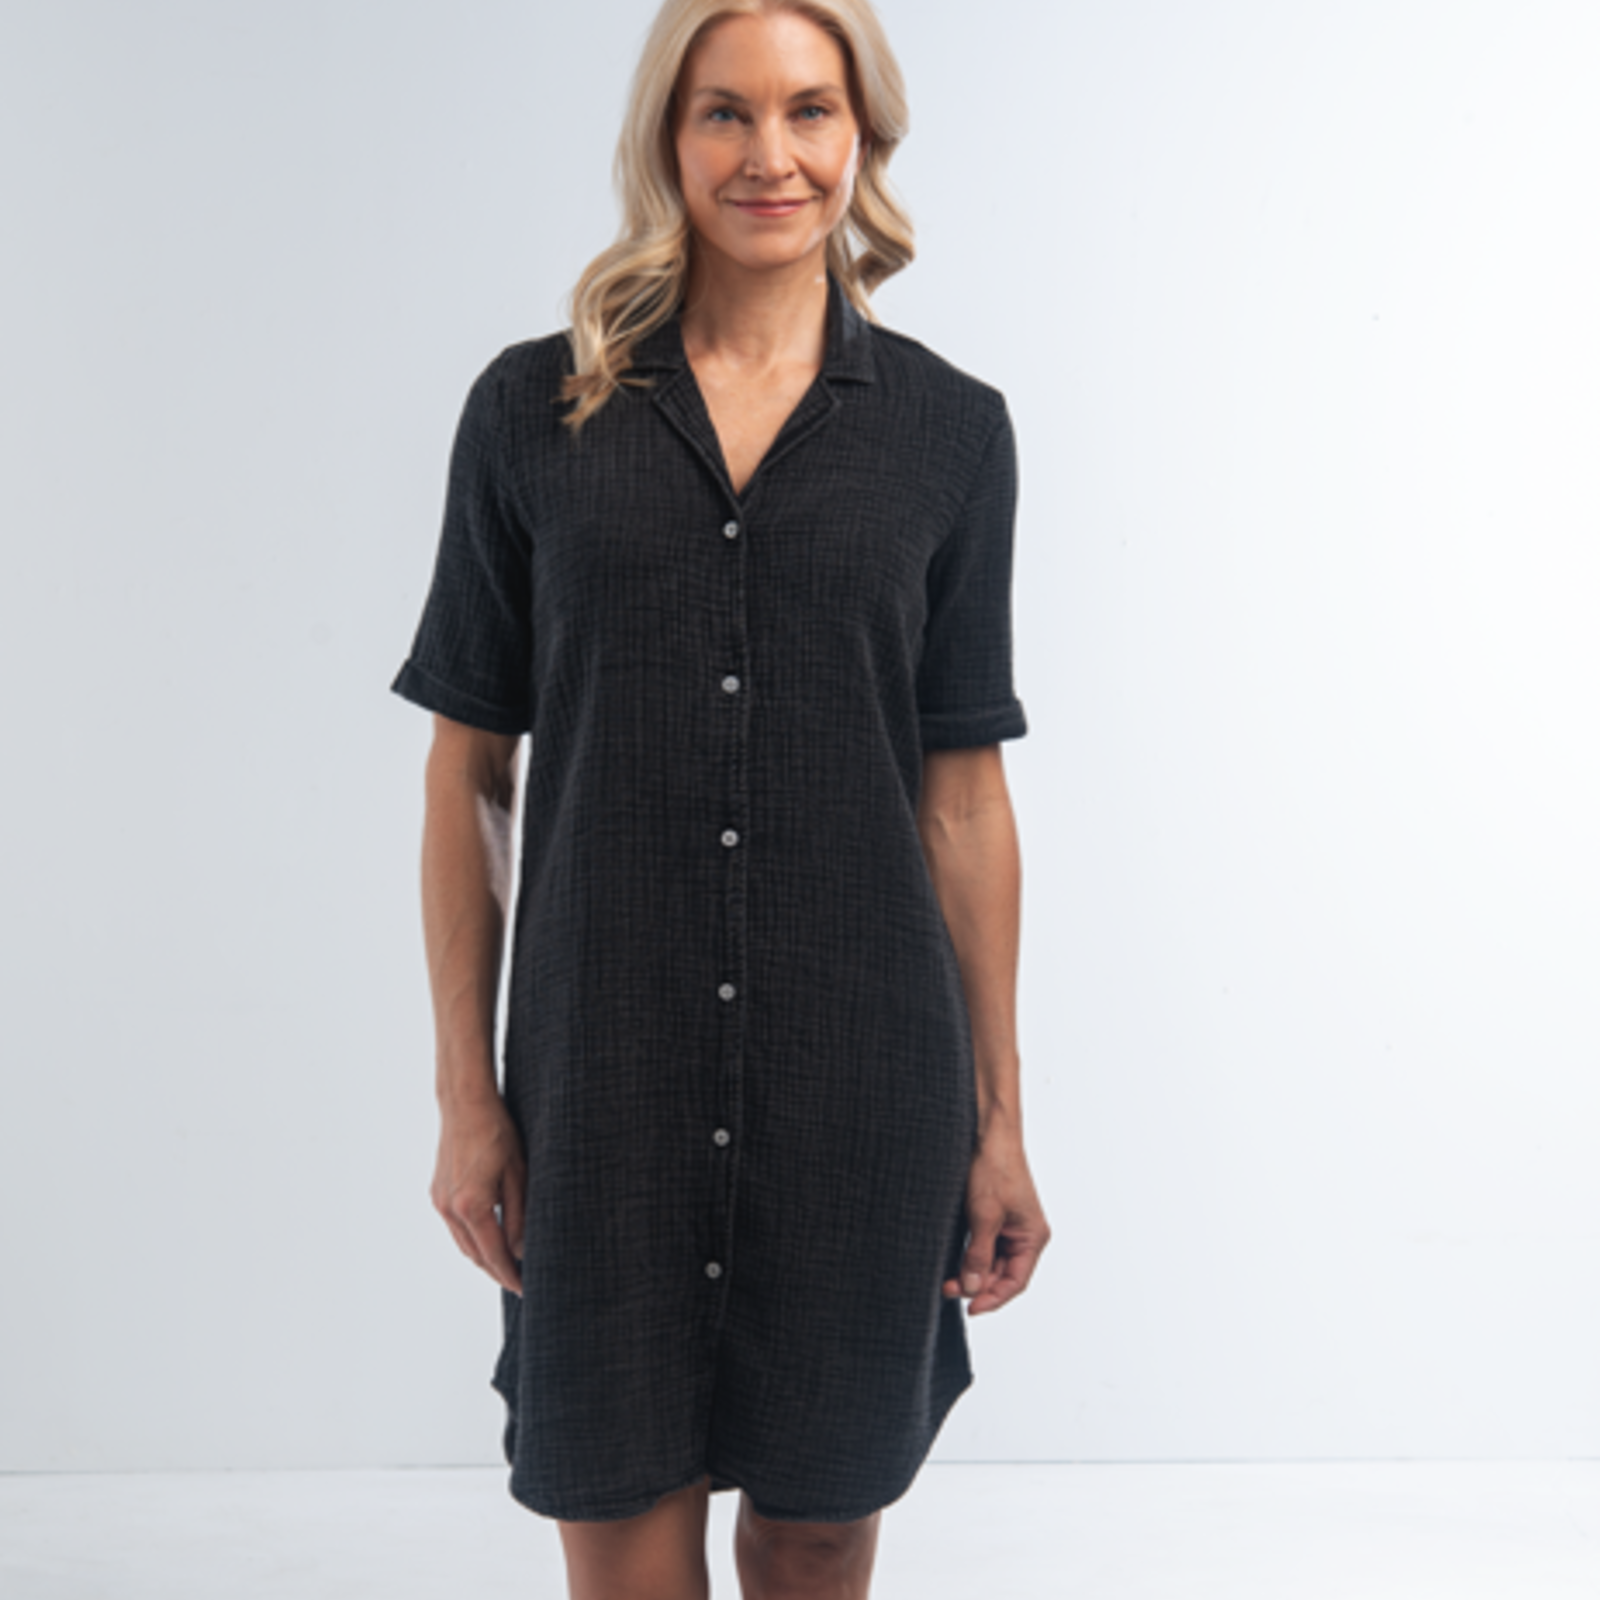 Simply Noelle Button Up Dress   XL  SDRES205LX loading=